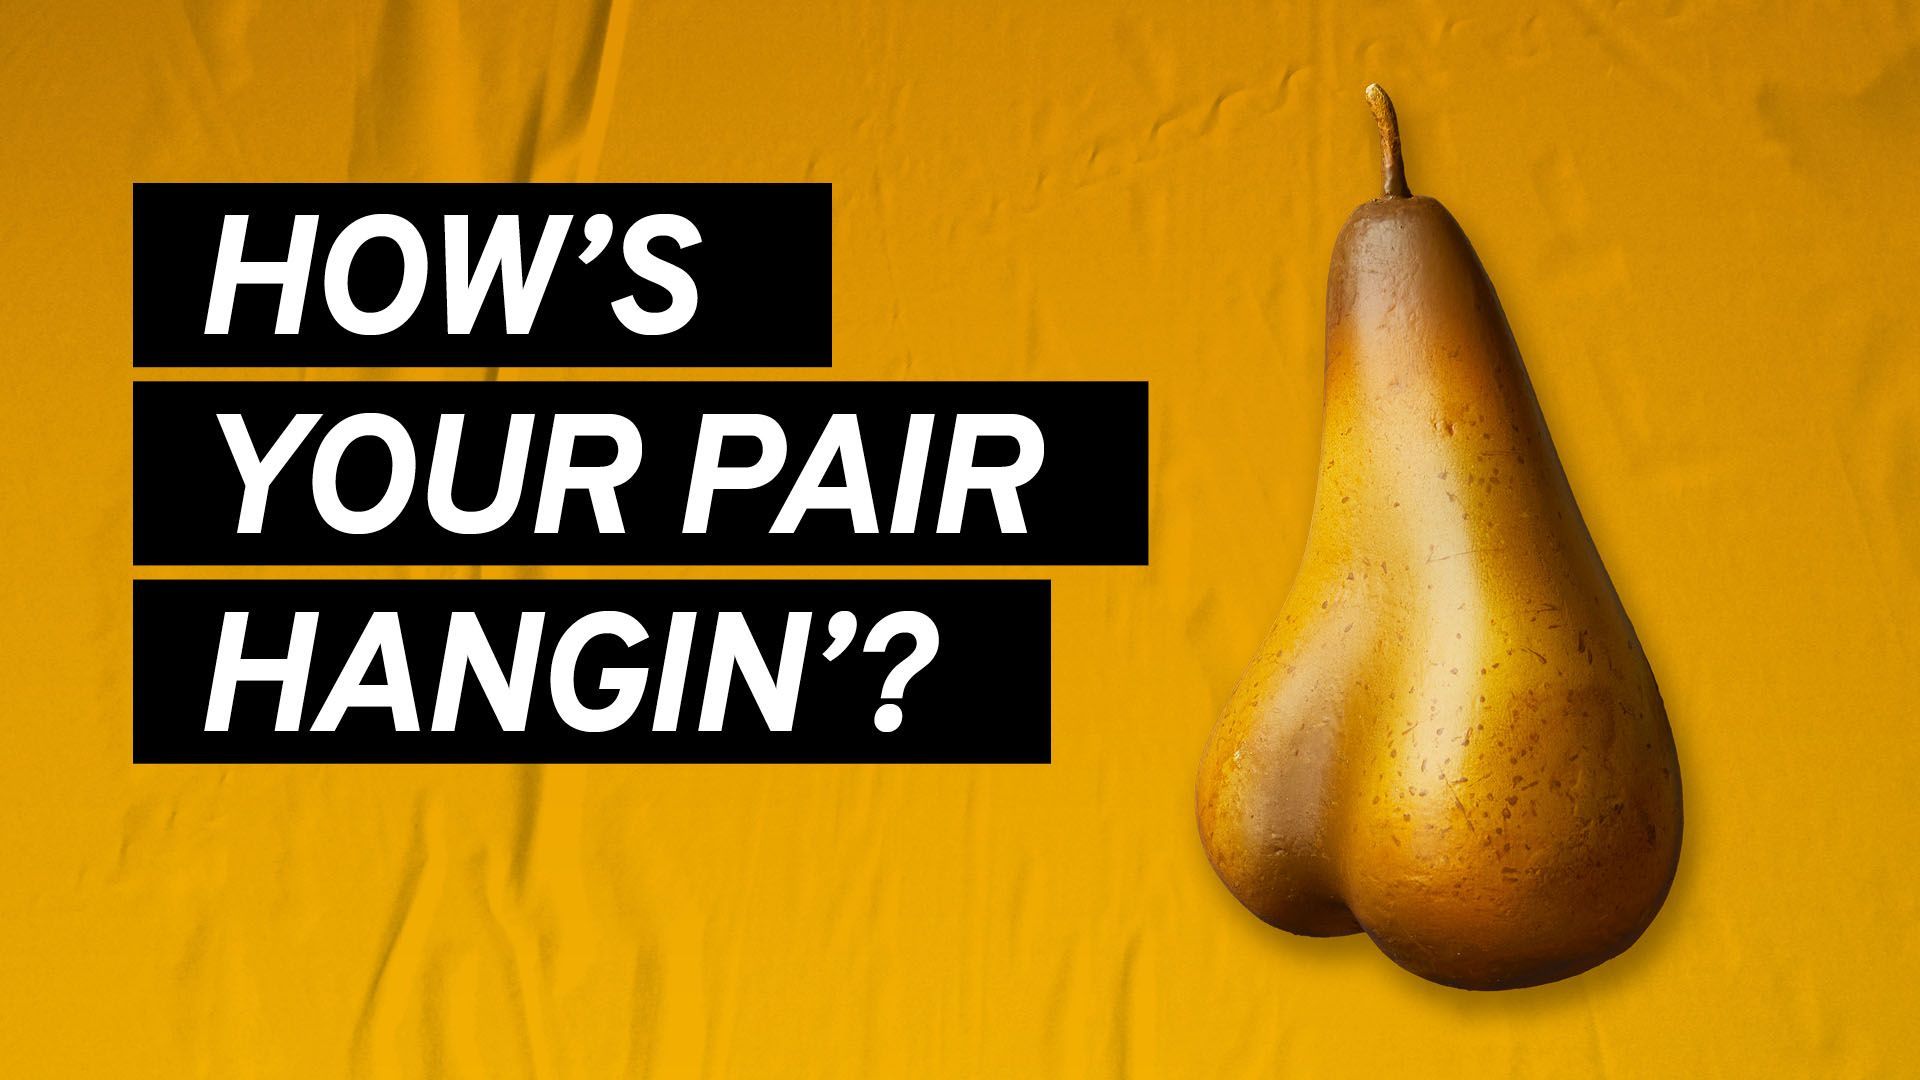 Suggestive image of a pear. Superimposed text reads: "How's your pair hangin'?"